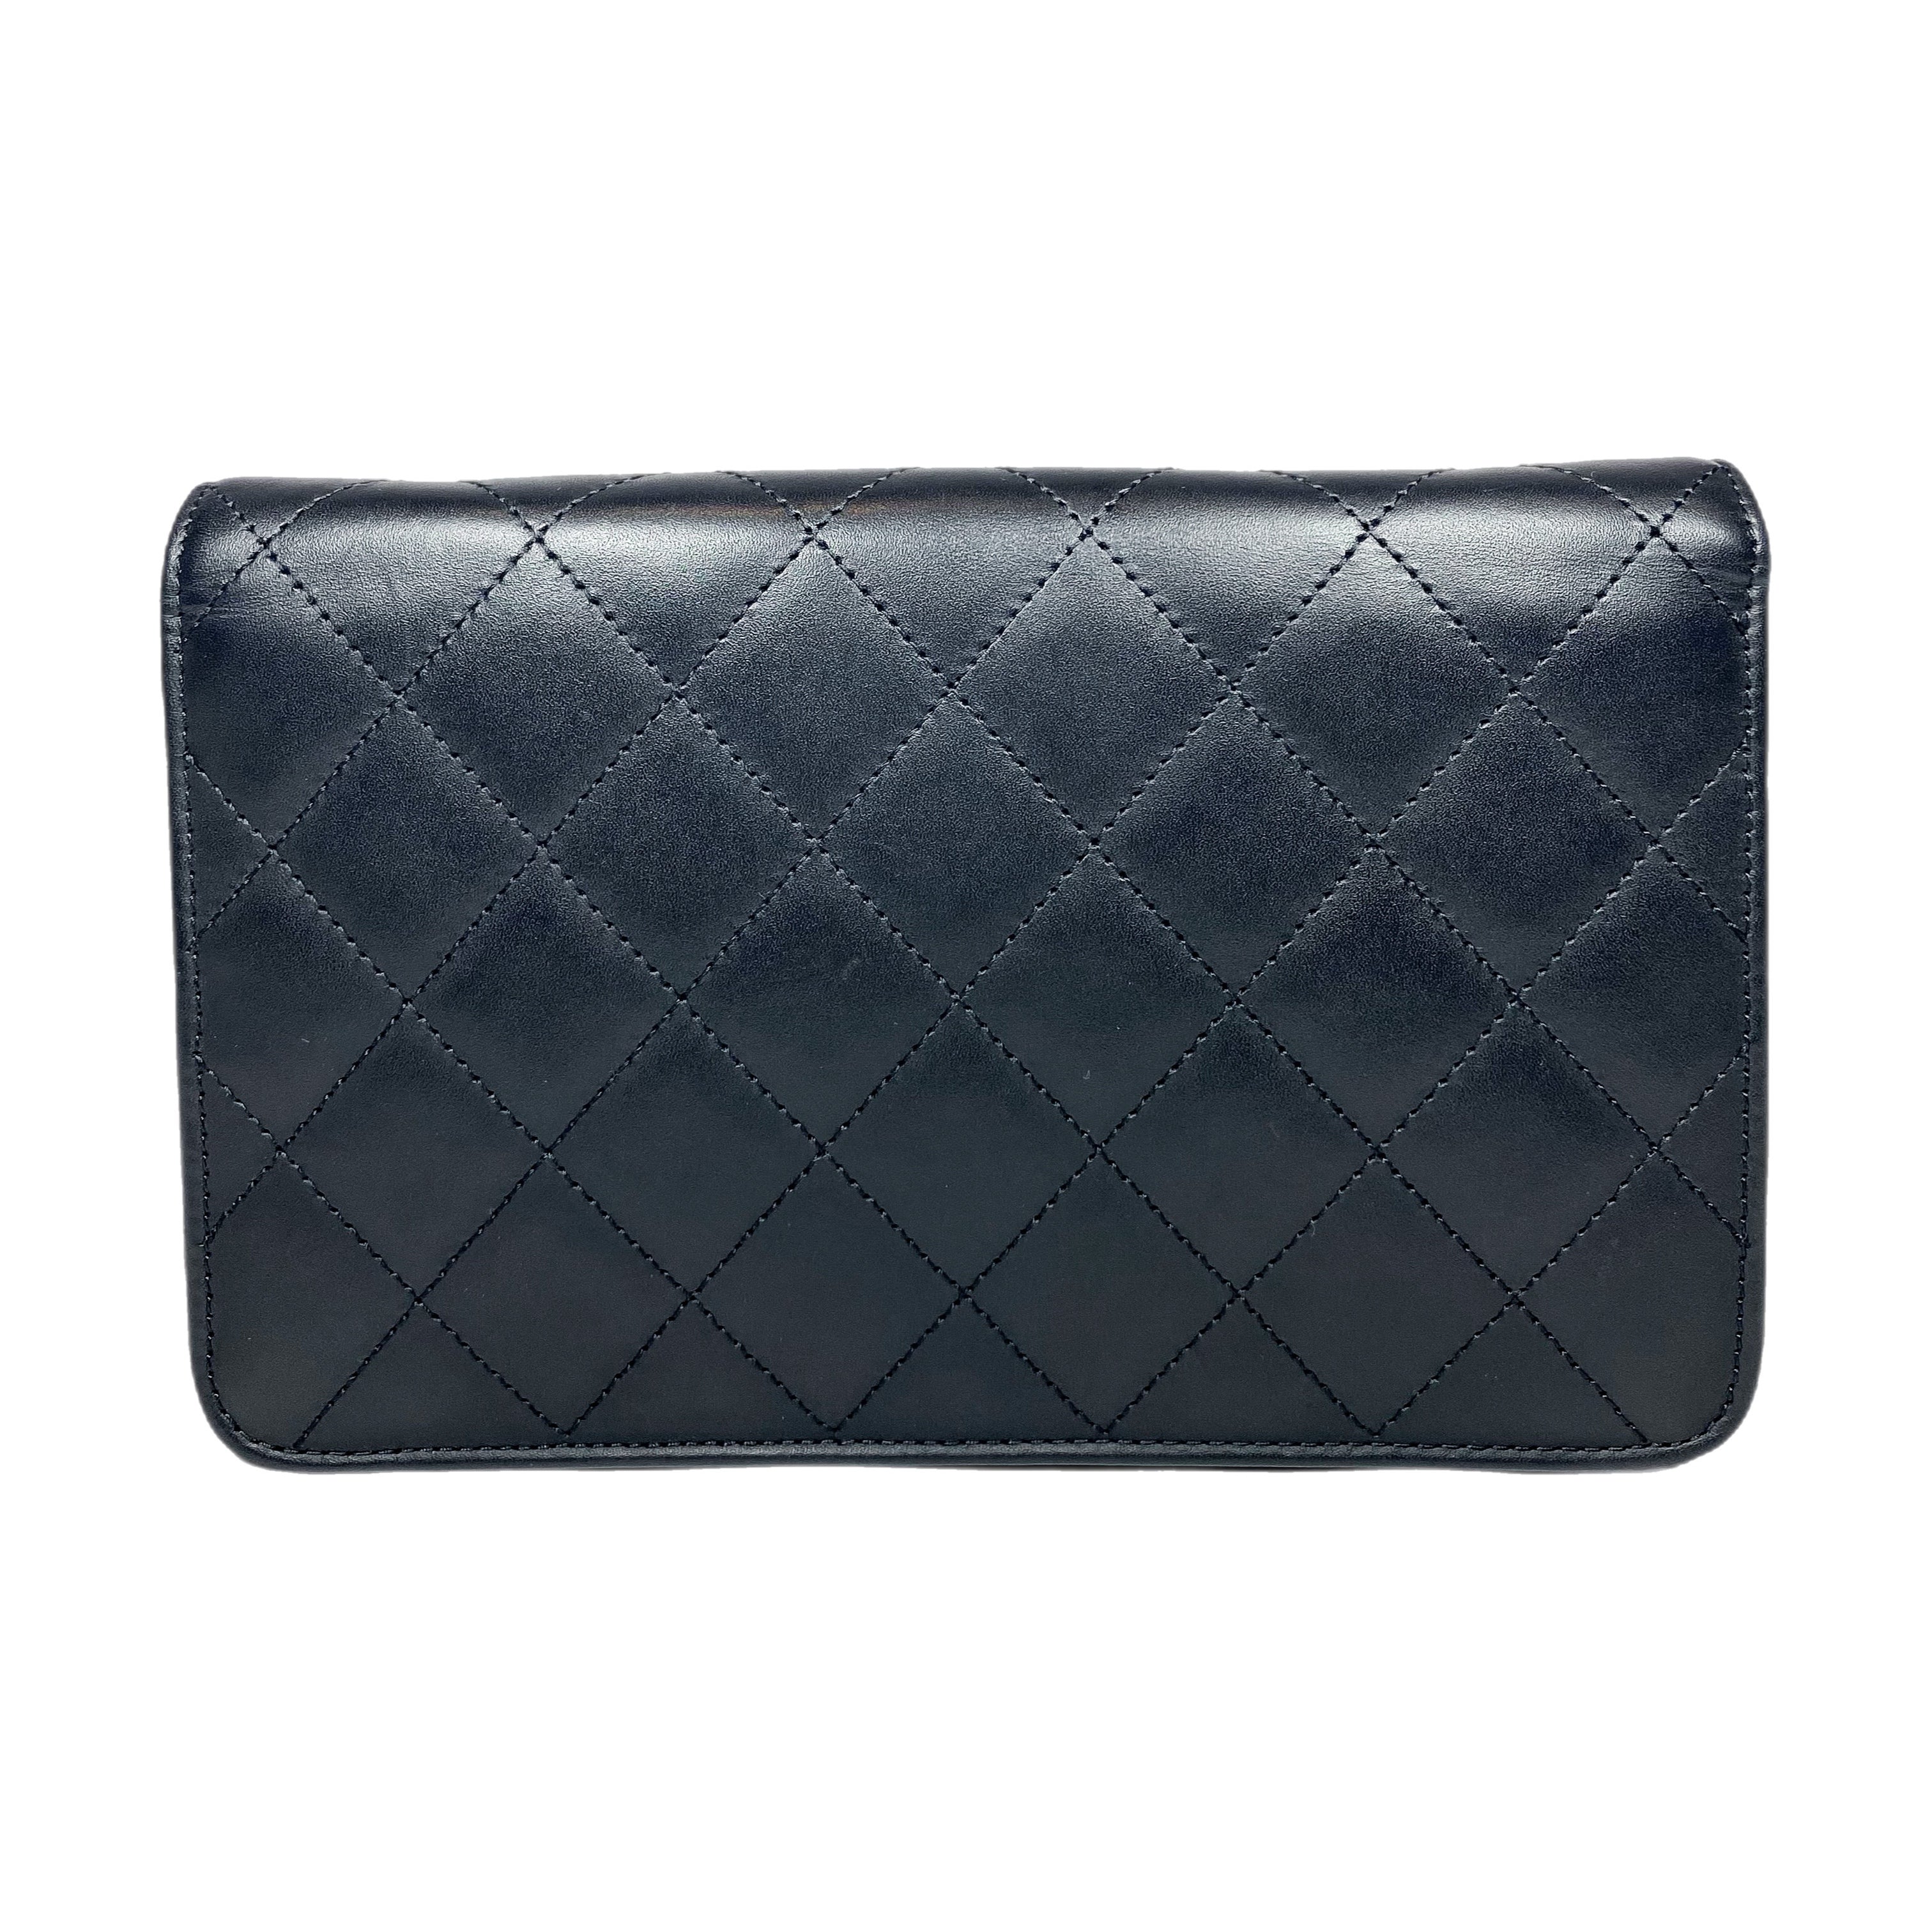 Chanel Black Quilted Cambon Lambskin Wallet on Chain